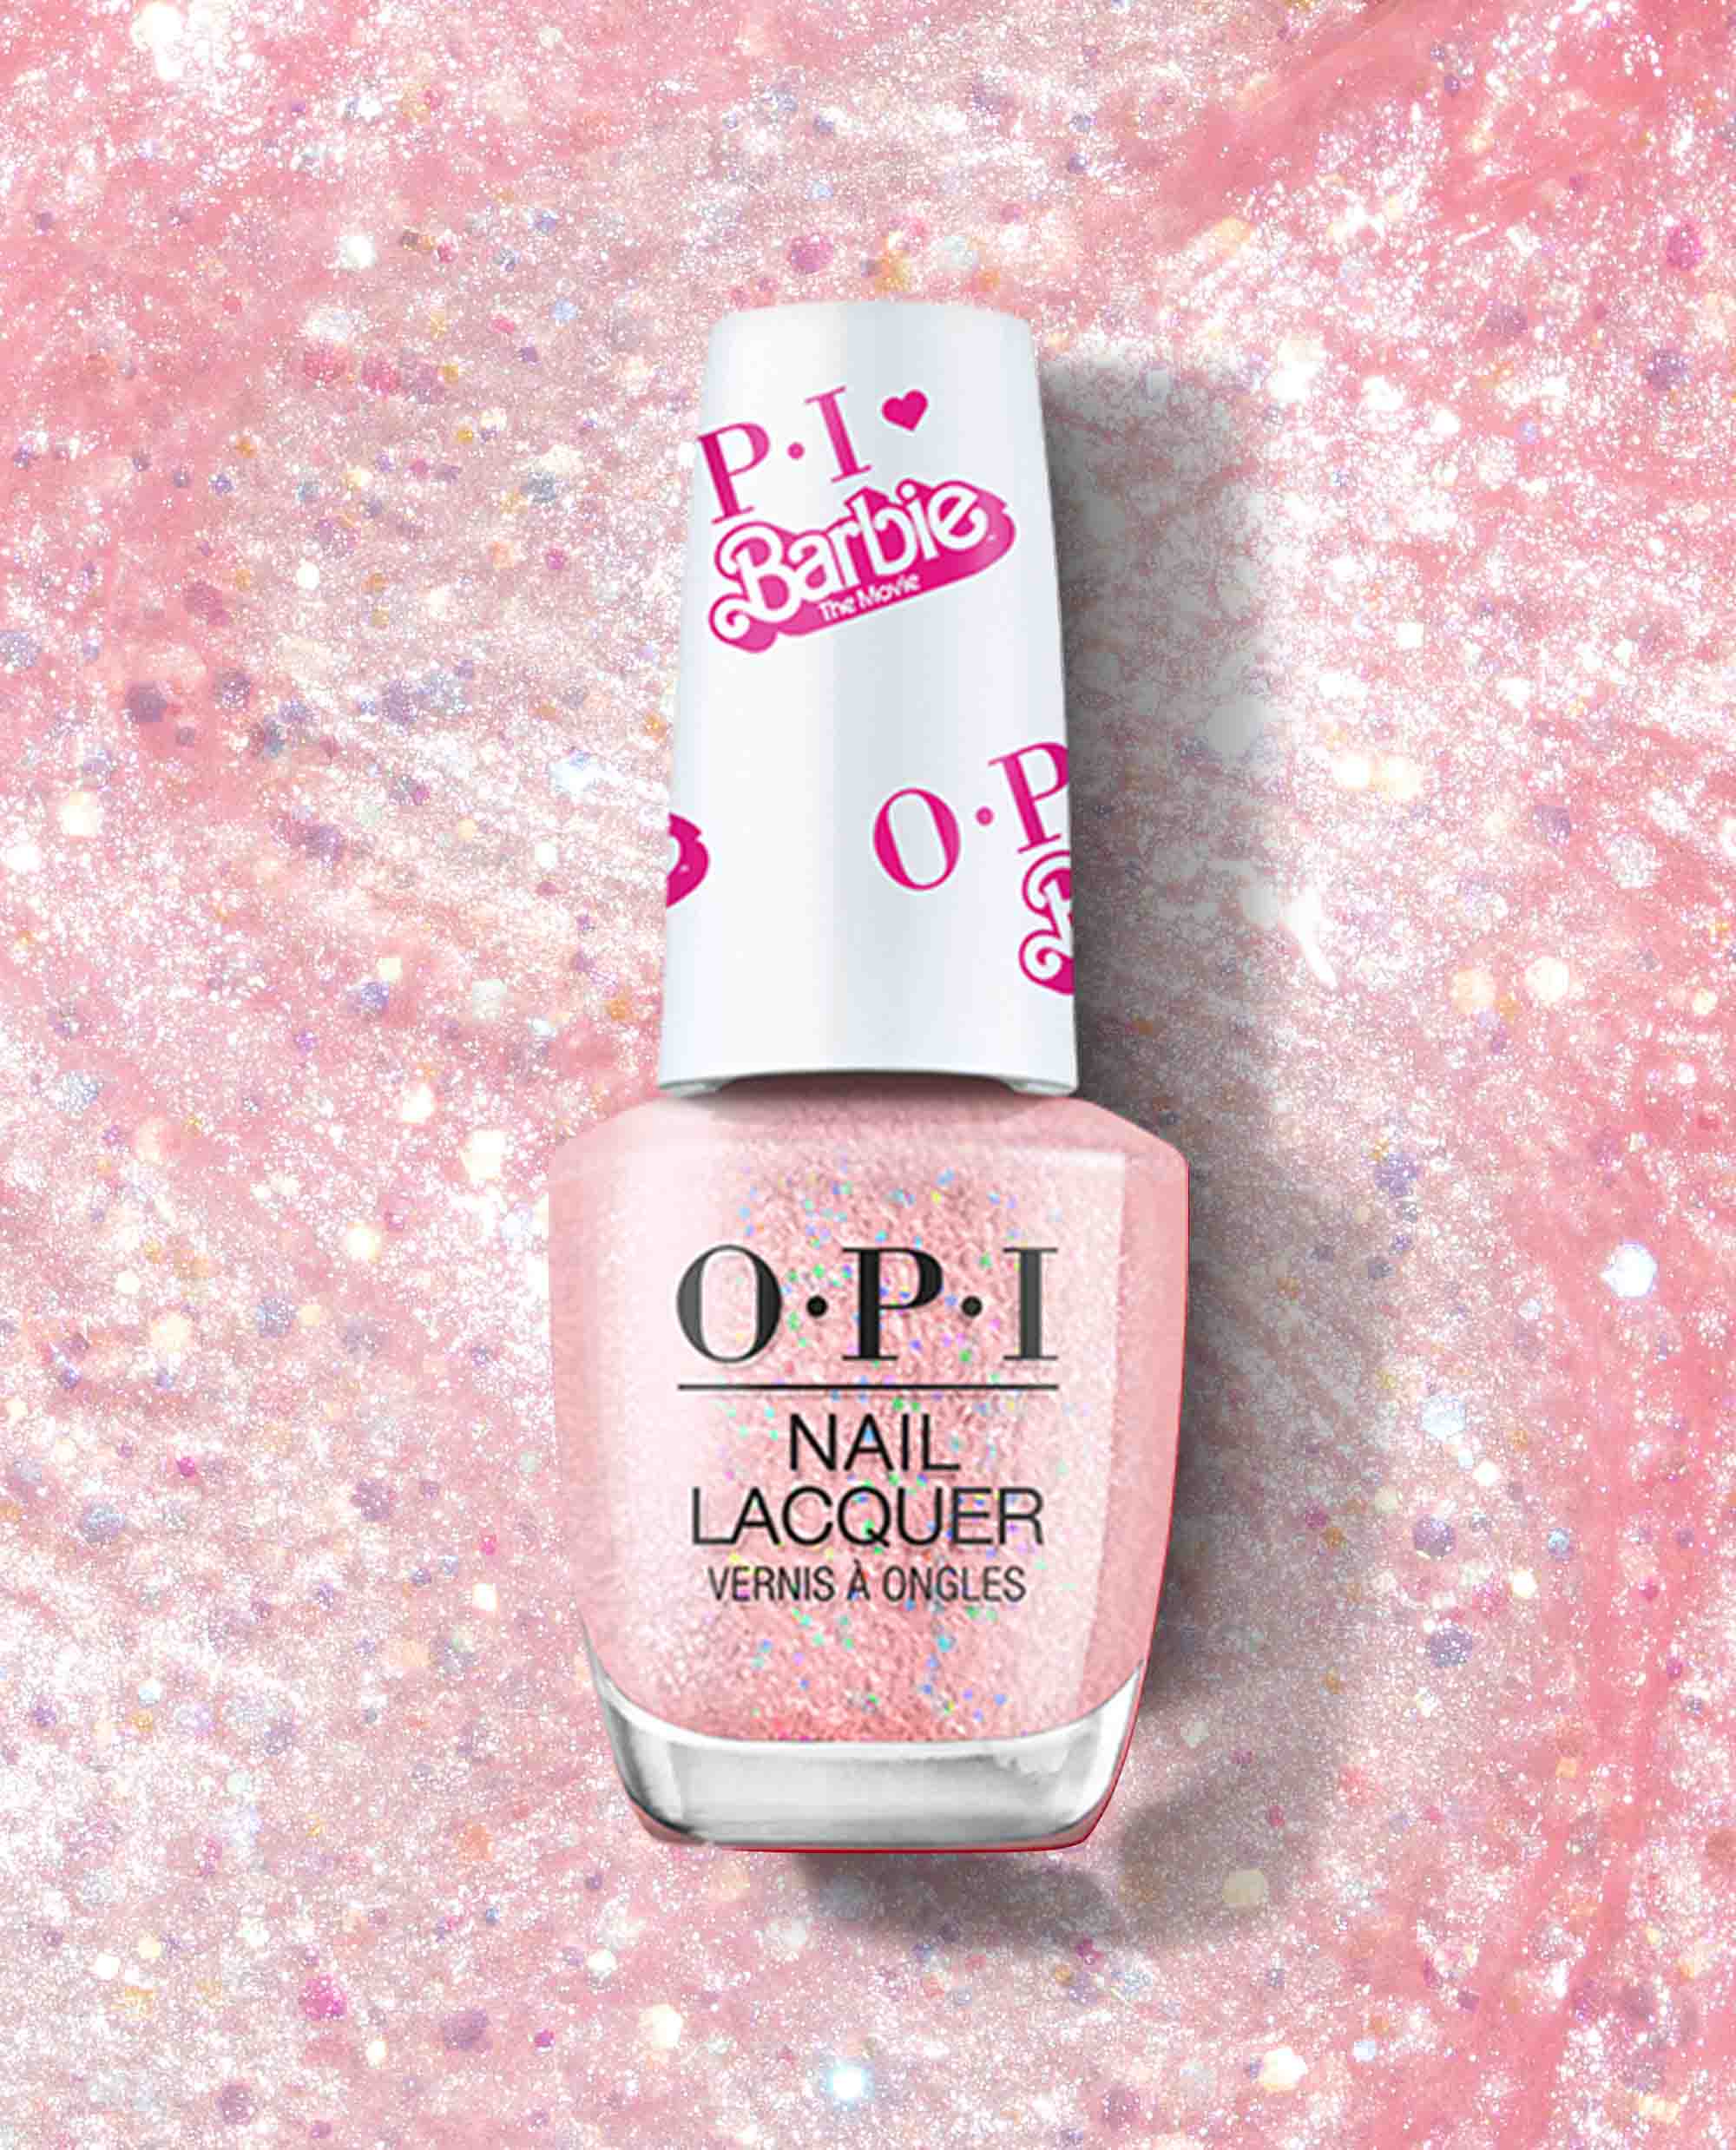 Winter nail designs: Achieve a dreamy manicure with OPI, Olive and June